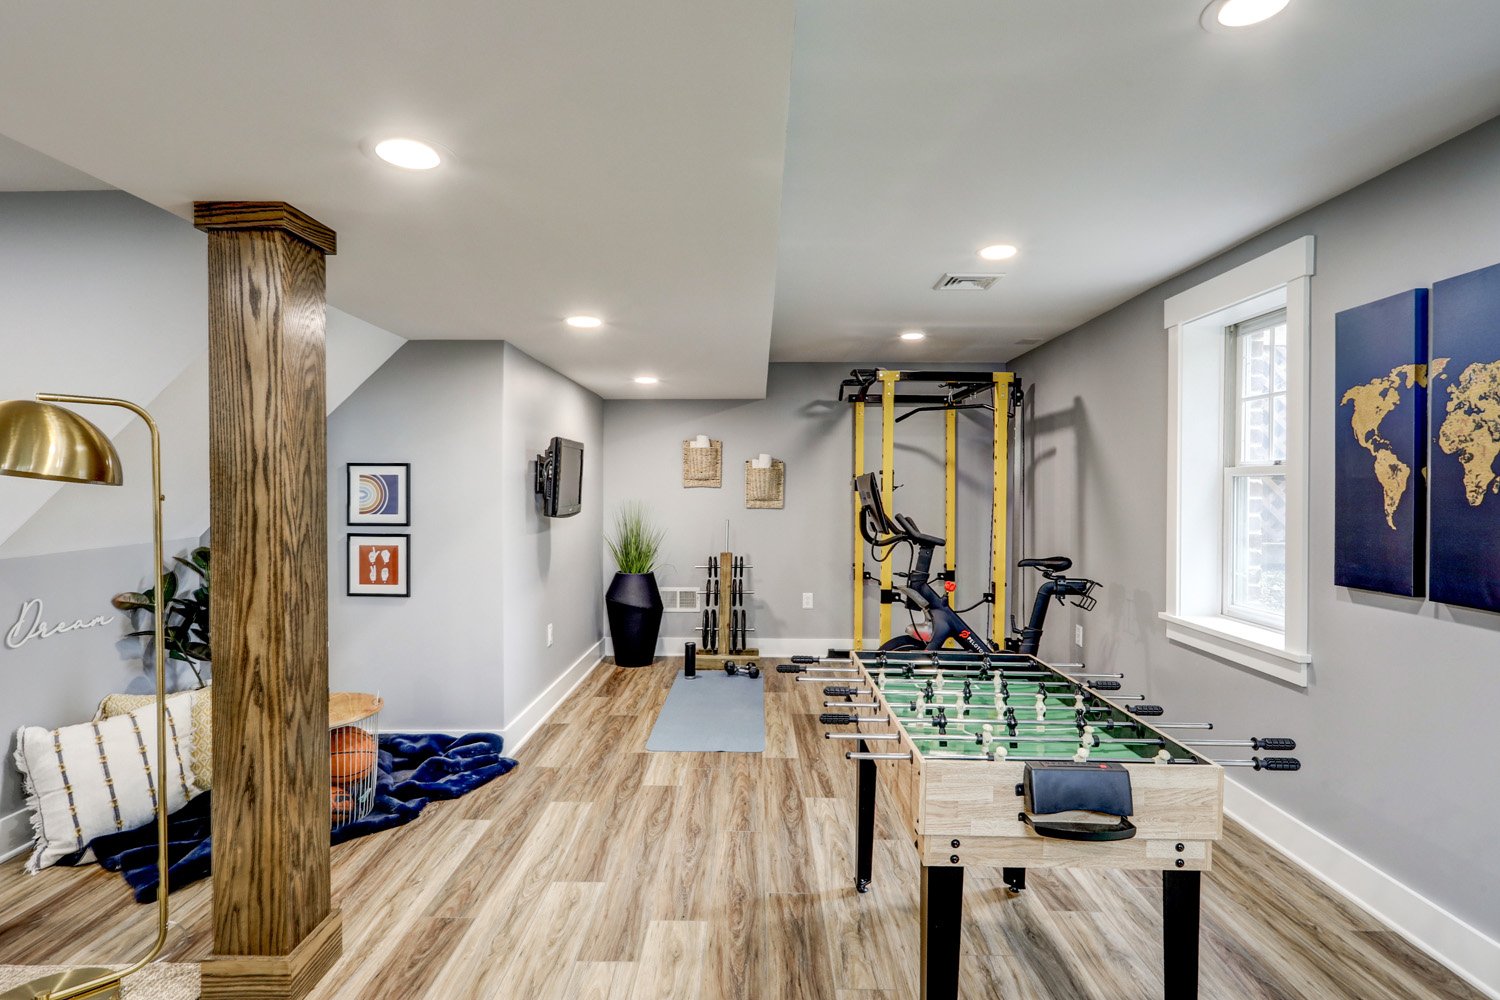 Lititz Basement Remodel with workout area and game area